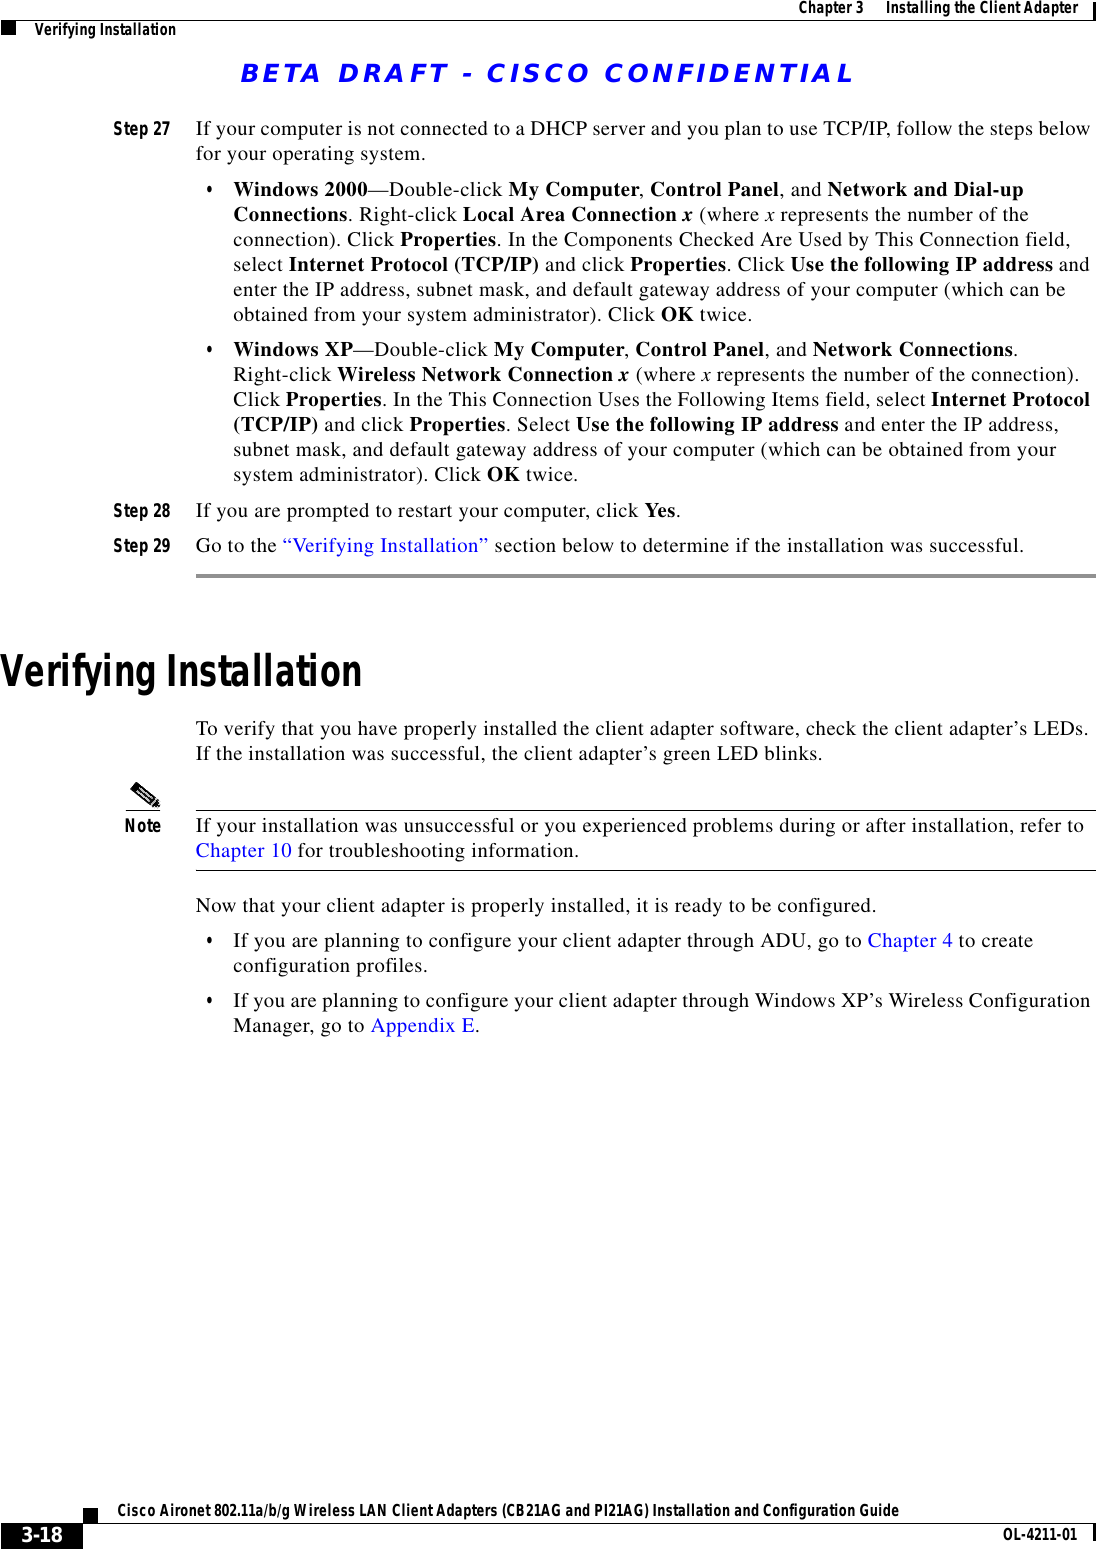 BETA DRAFT - CISCO CONFIDENTIAL3-18Cisco Aironet 802.11a/b/g Wireless LAN Client Adapters (CB21AG and PI21AG) Installation and Configuration Guide OL-4211-01Chapter 3      Installing the Client AdapterVerifying InstallationStep 27 If your computer is not connected to a DHCP server and you plan to use TCP/IP, follow the steps below for your operating system.•Windows 2000—Double-click My Computer, Control Panel, and Network and Dial-up Connections. Right-click Local Area Connection x (where x represents the number of the connection). Click Properties. In the Components Checked Are Used by This Connection field, select Internet Protocol (TCP/IP) and click Properties. Click Use the following IP address and enter the IP address, subnet mask, and default gateway address of your computer (which can be obtained from your system administrator). Click OK twice.•Windows XP—Double-click My Computer, Control Panel, and Network Connections. Right-click Wireless Network Connection x (where x represents the number of the connection). Click Properties. In the This Connection Uses the Following Items field, select Internet Protocol (TCP/IP) and click Properties. Select Use the following IP address and enter the IP address, subnet mask, and default gateway address of your computer (which can be obtained from your system administrator). Click OK twice.Step 28 If you are prompted to restart your computer, click Yes.Step 29 Go to the “Verifying Installation” section below to determine if the installation was successful.Verifying InstallationTo verify that you have properly installed the client adapter software, check the client adapter’s LEDs. If the installation was successful, the client adapter’s green LED blinks.Note If your installation was unsuccessful or you experienced problems during or after installation, refer to Chapter 10 for troubleshooting information.Now that your client adapter is properly installed, it is ready to be configured.•If you are planning to configure your client adapter through ADU, go to Chapter 4 to create configuration profiles.•If you are planning to configure your client adapter through Windows XP’s Wireless Configuration Manager, go to Appendix E.